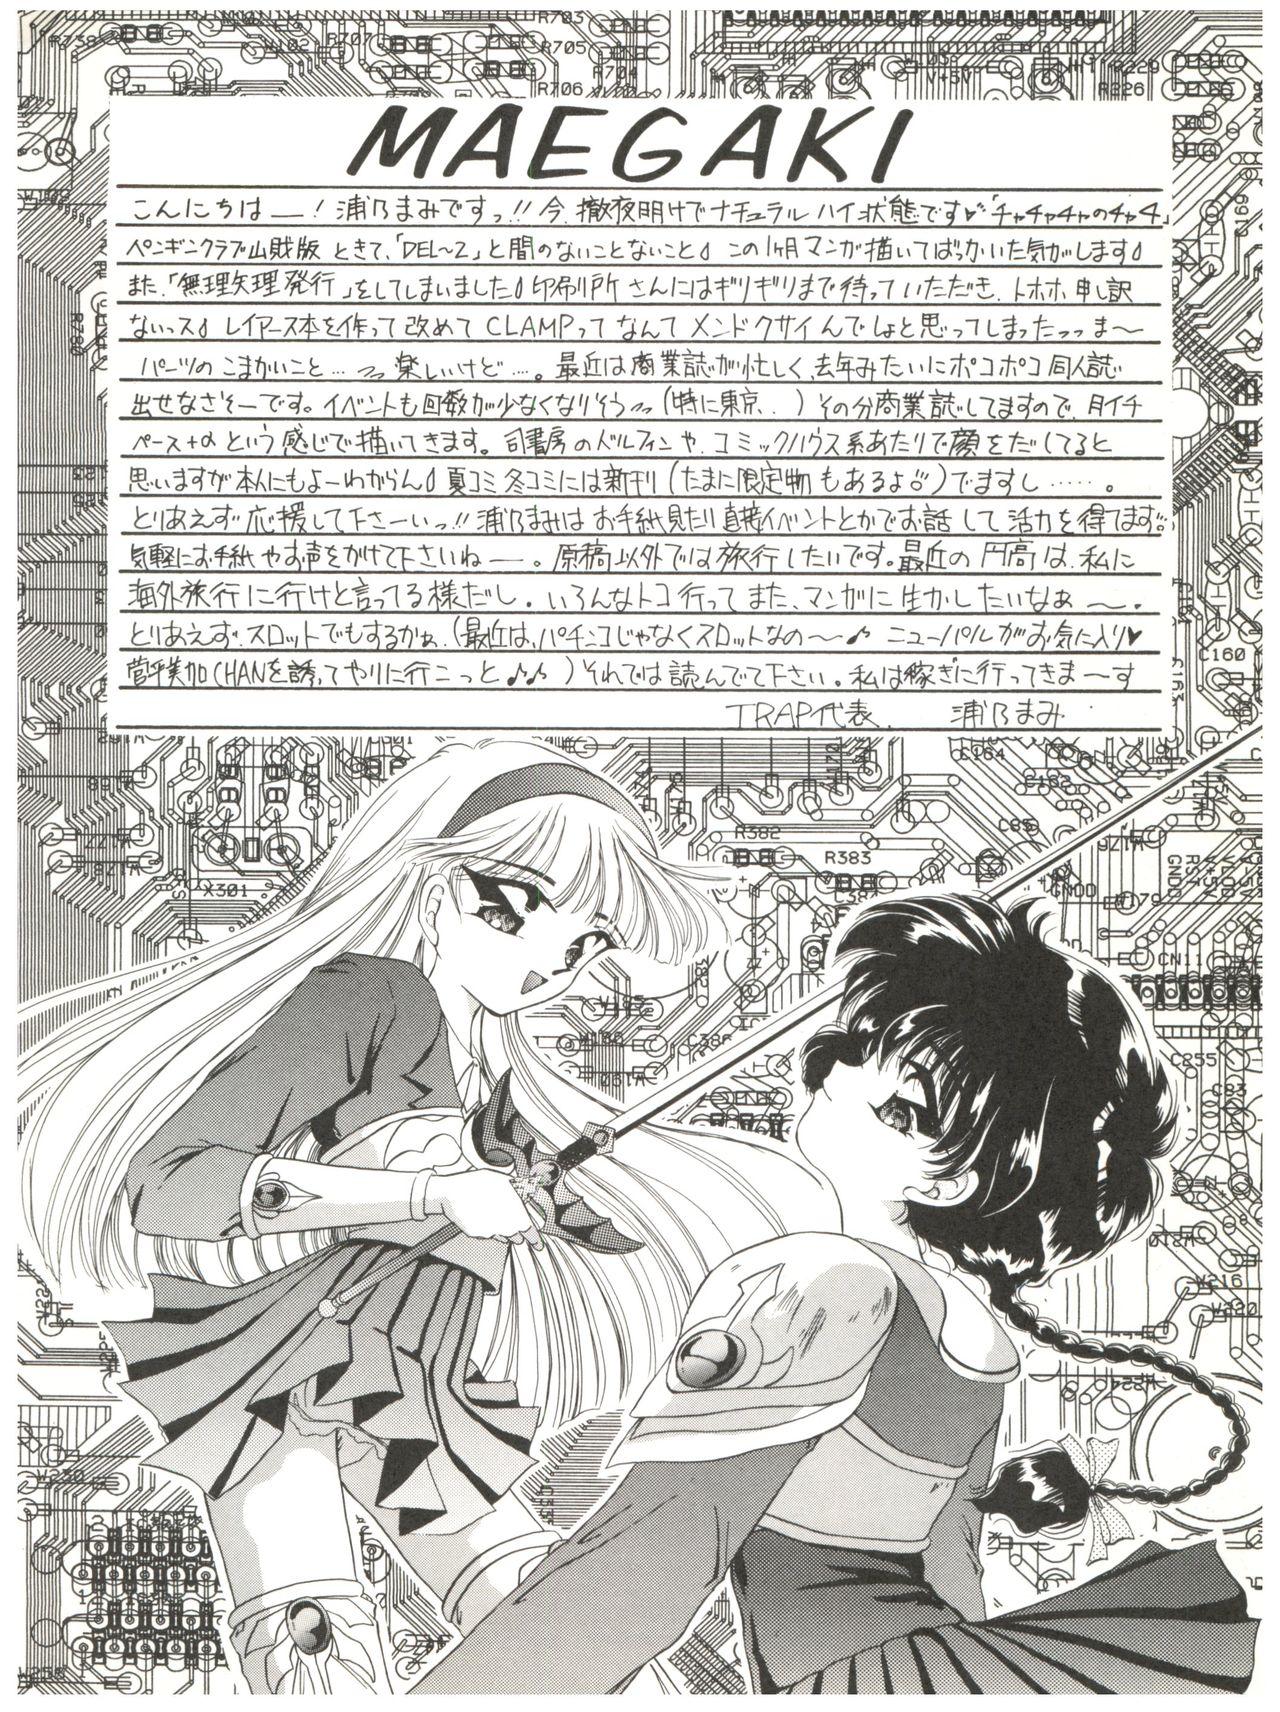 Smooth DELICIOUS 2nd STAGE - Magic knight rayearth European Porn - Page 4